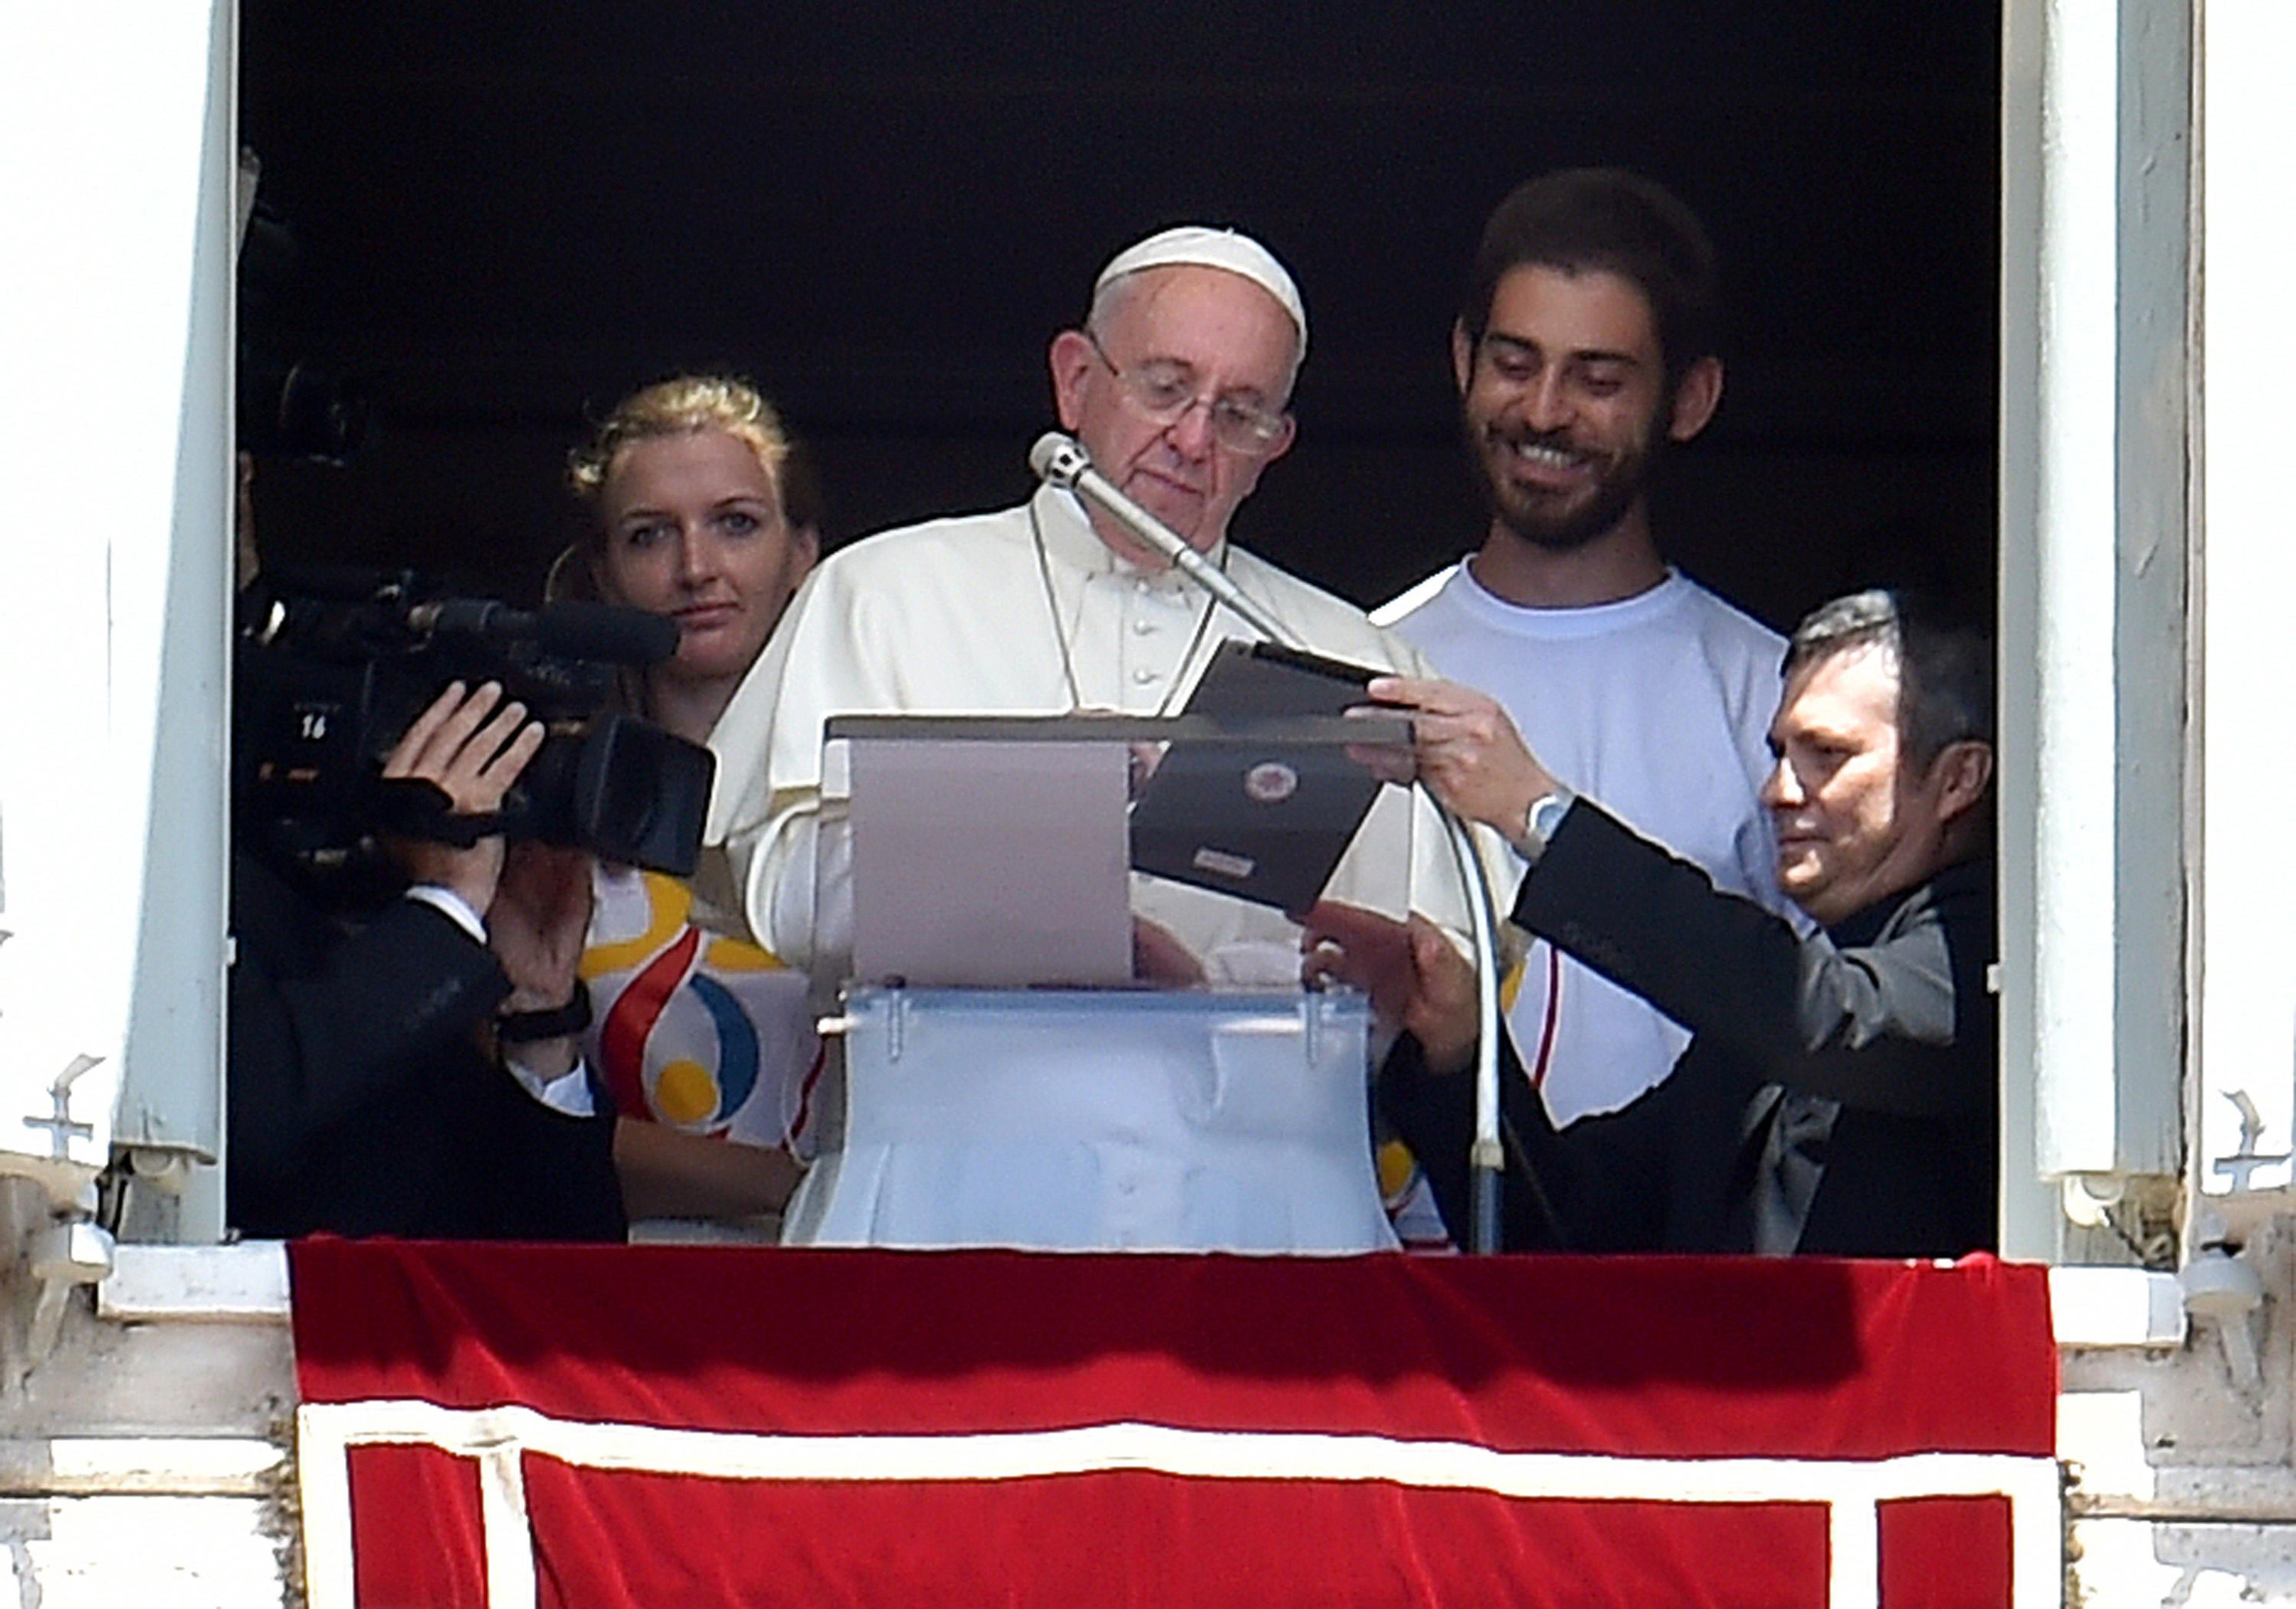 Pope signing up for WYD 2016